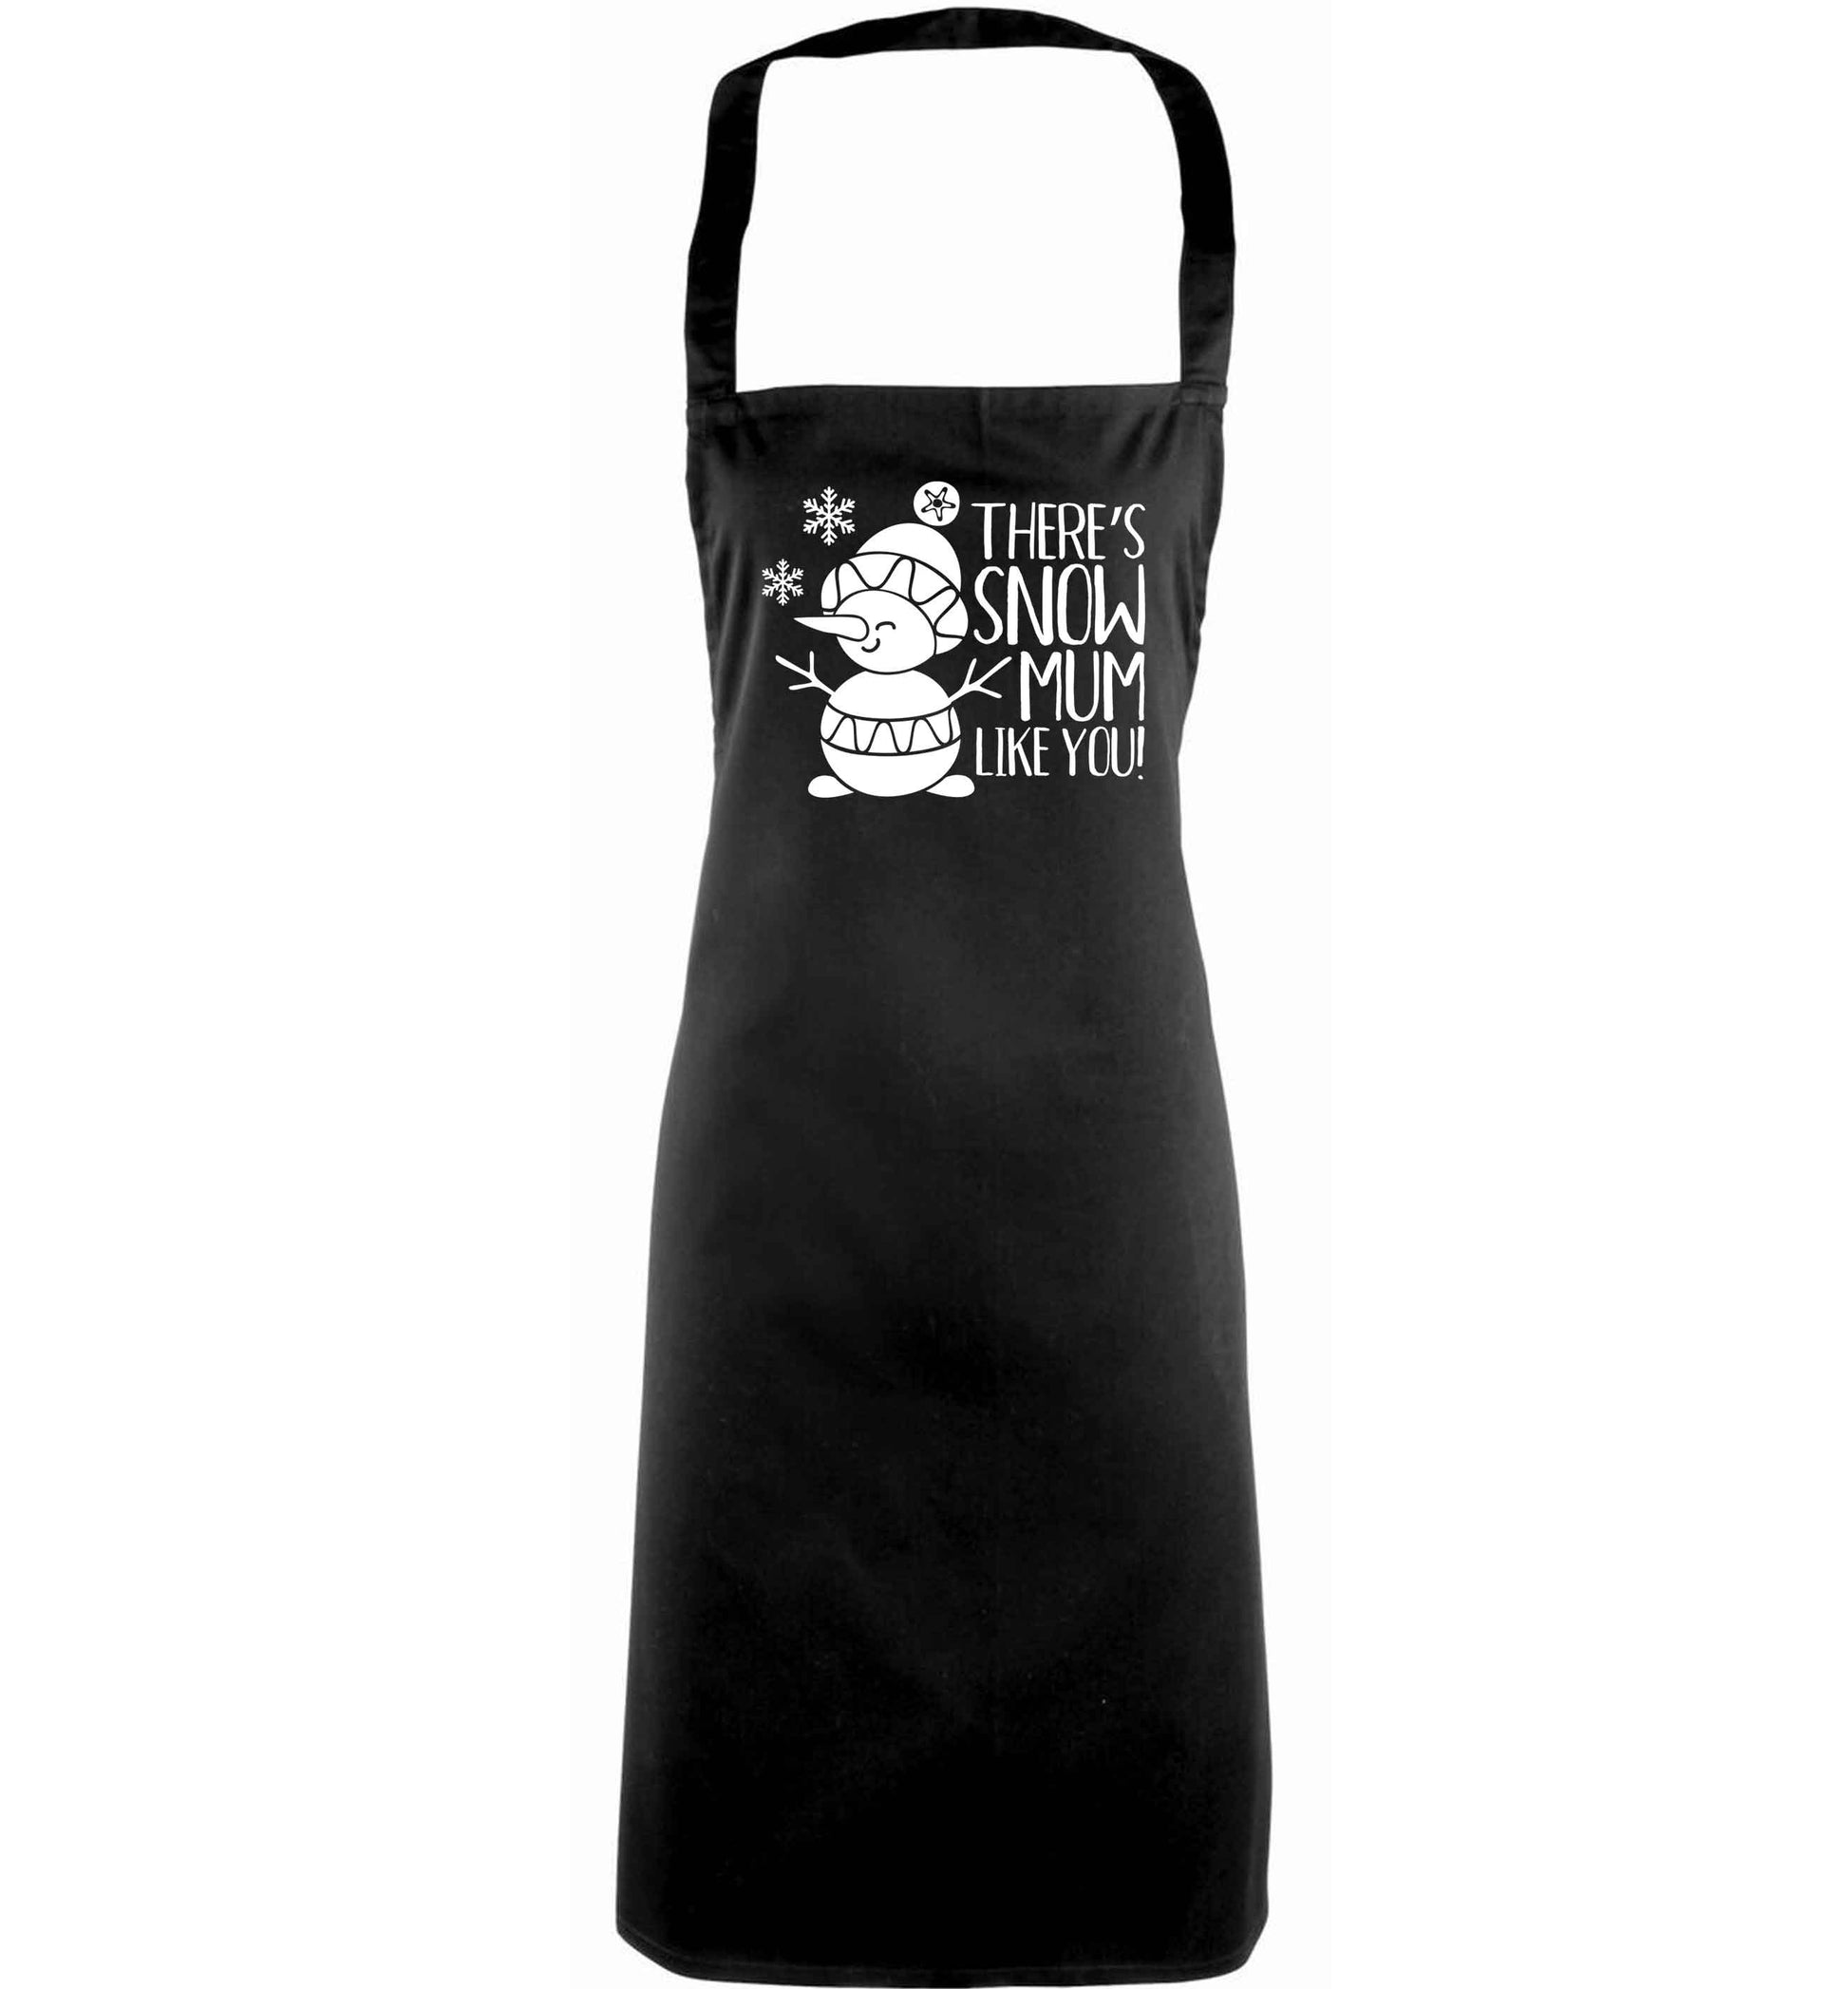 There's snow mum like you adults black apron